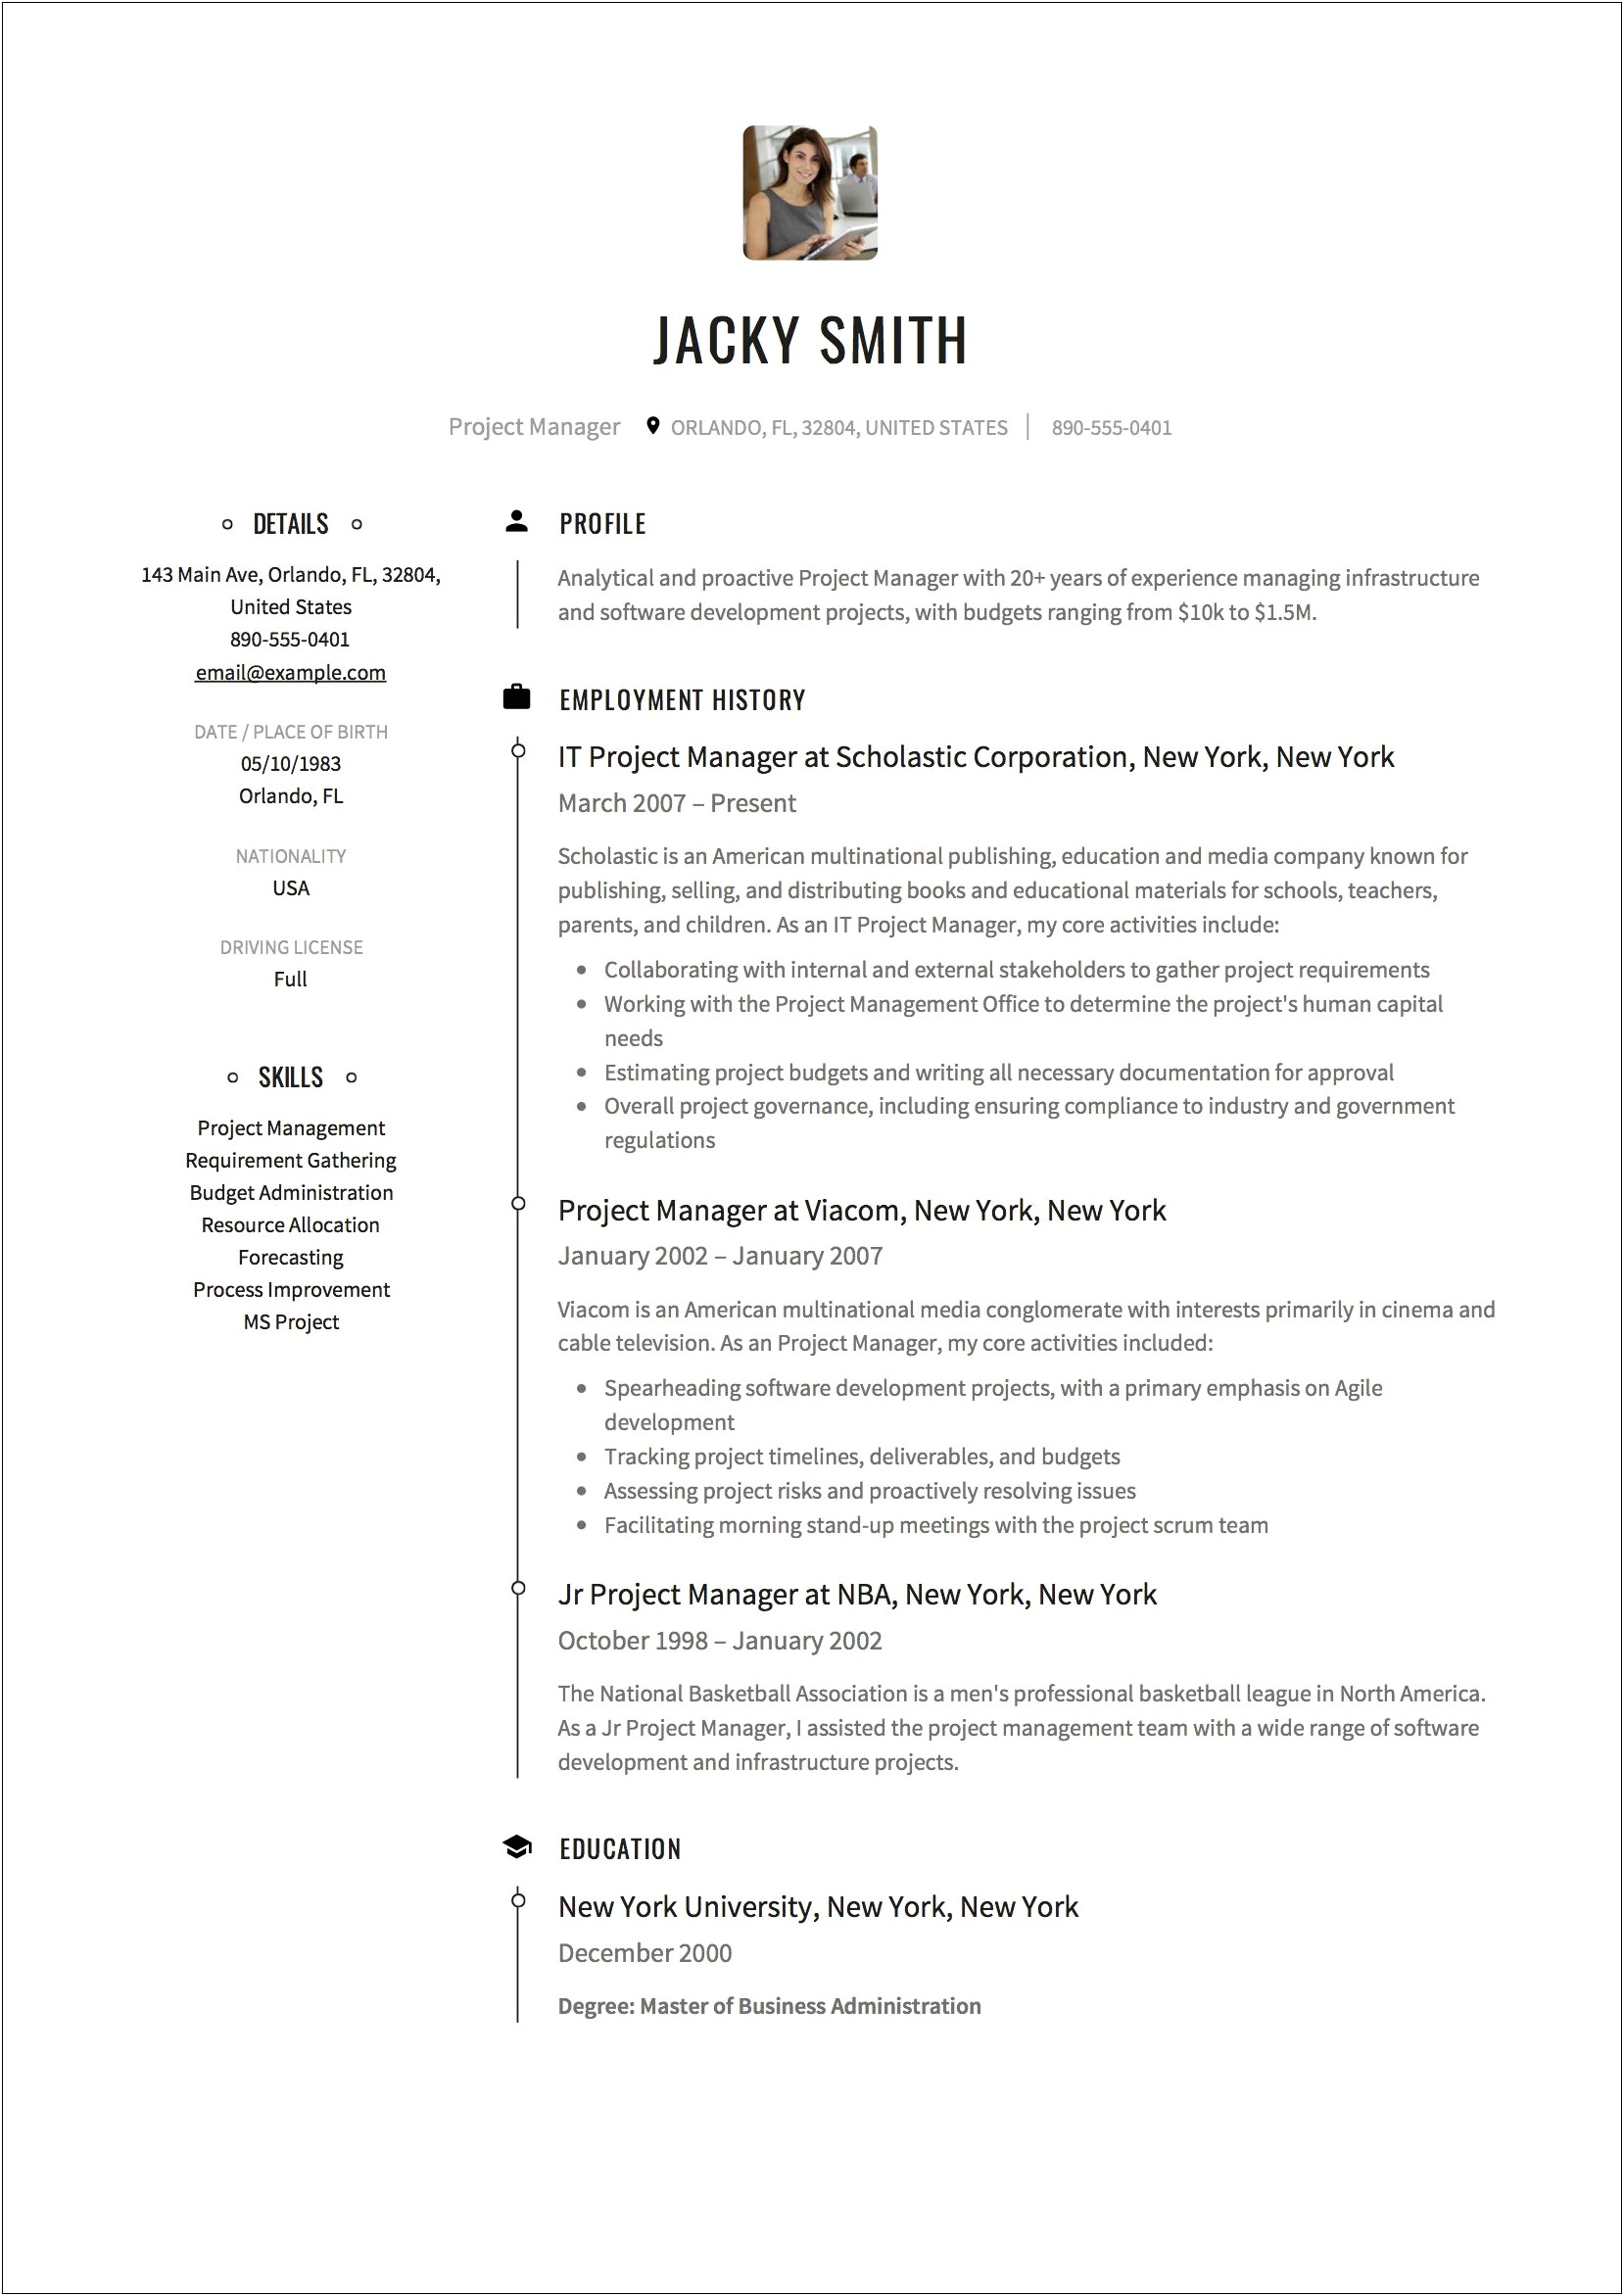 Senior Hr Project Manager Pmp Resume Summary Doc